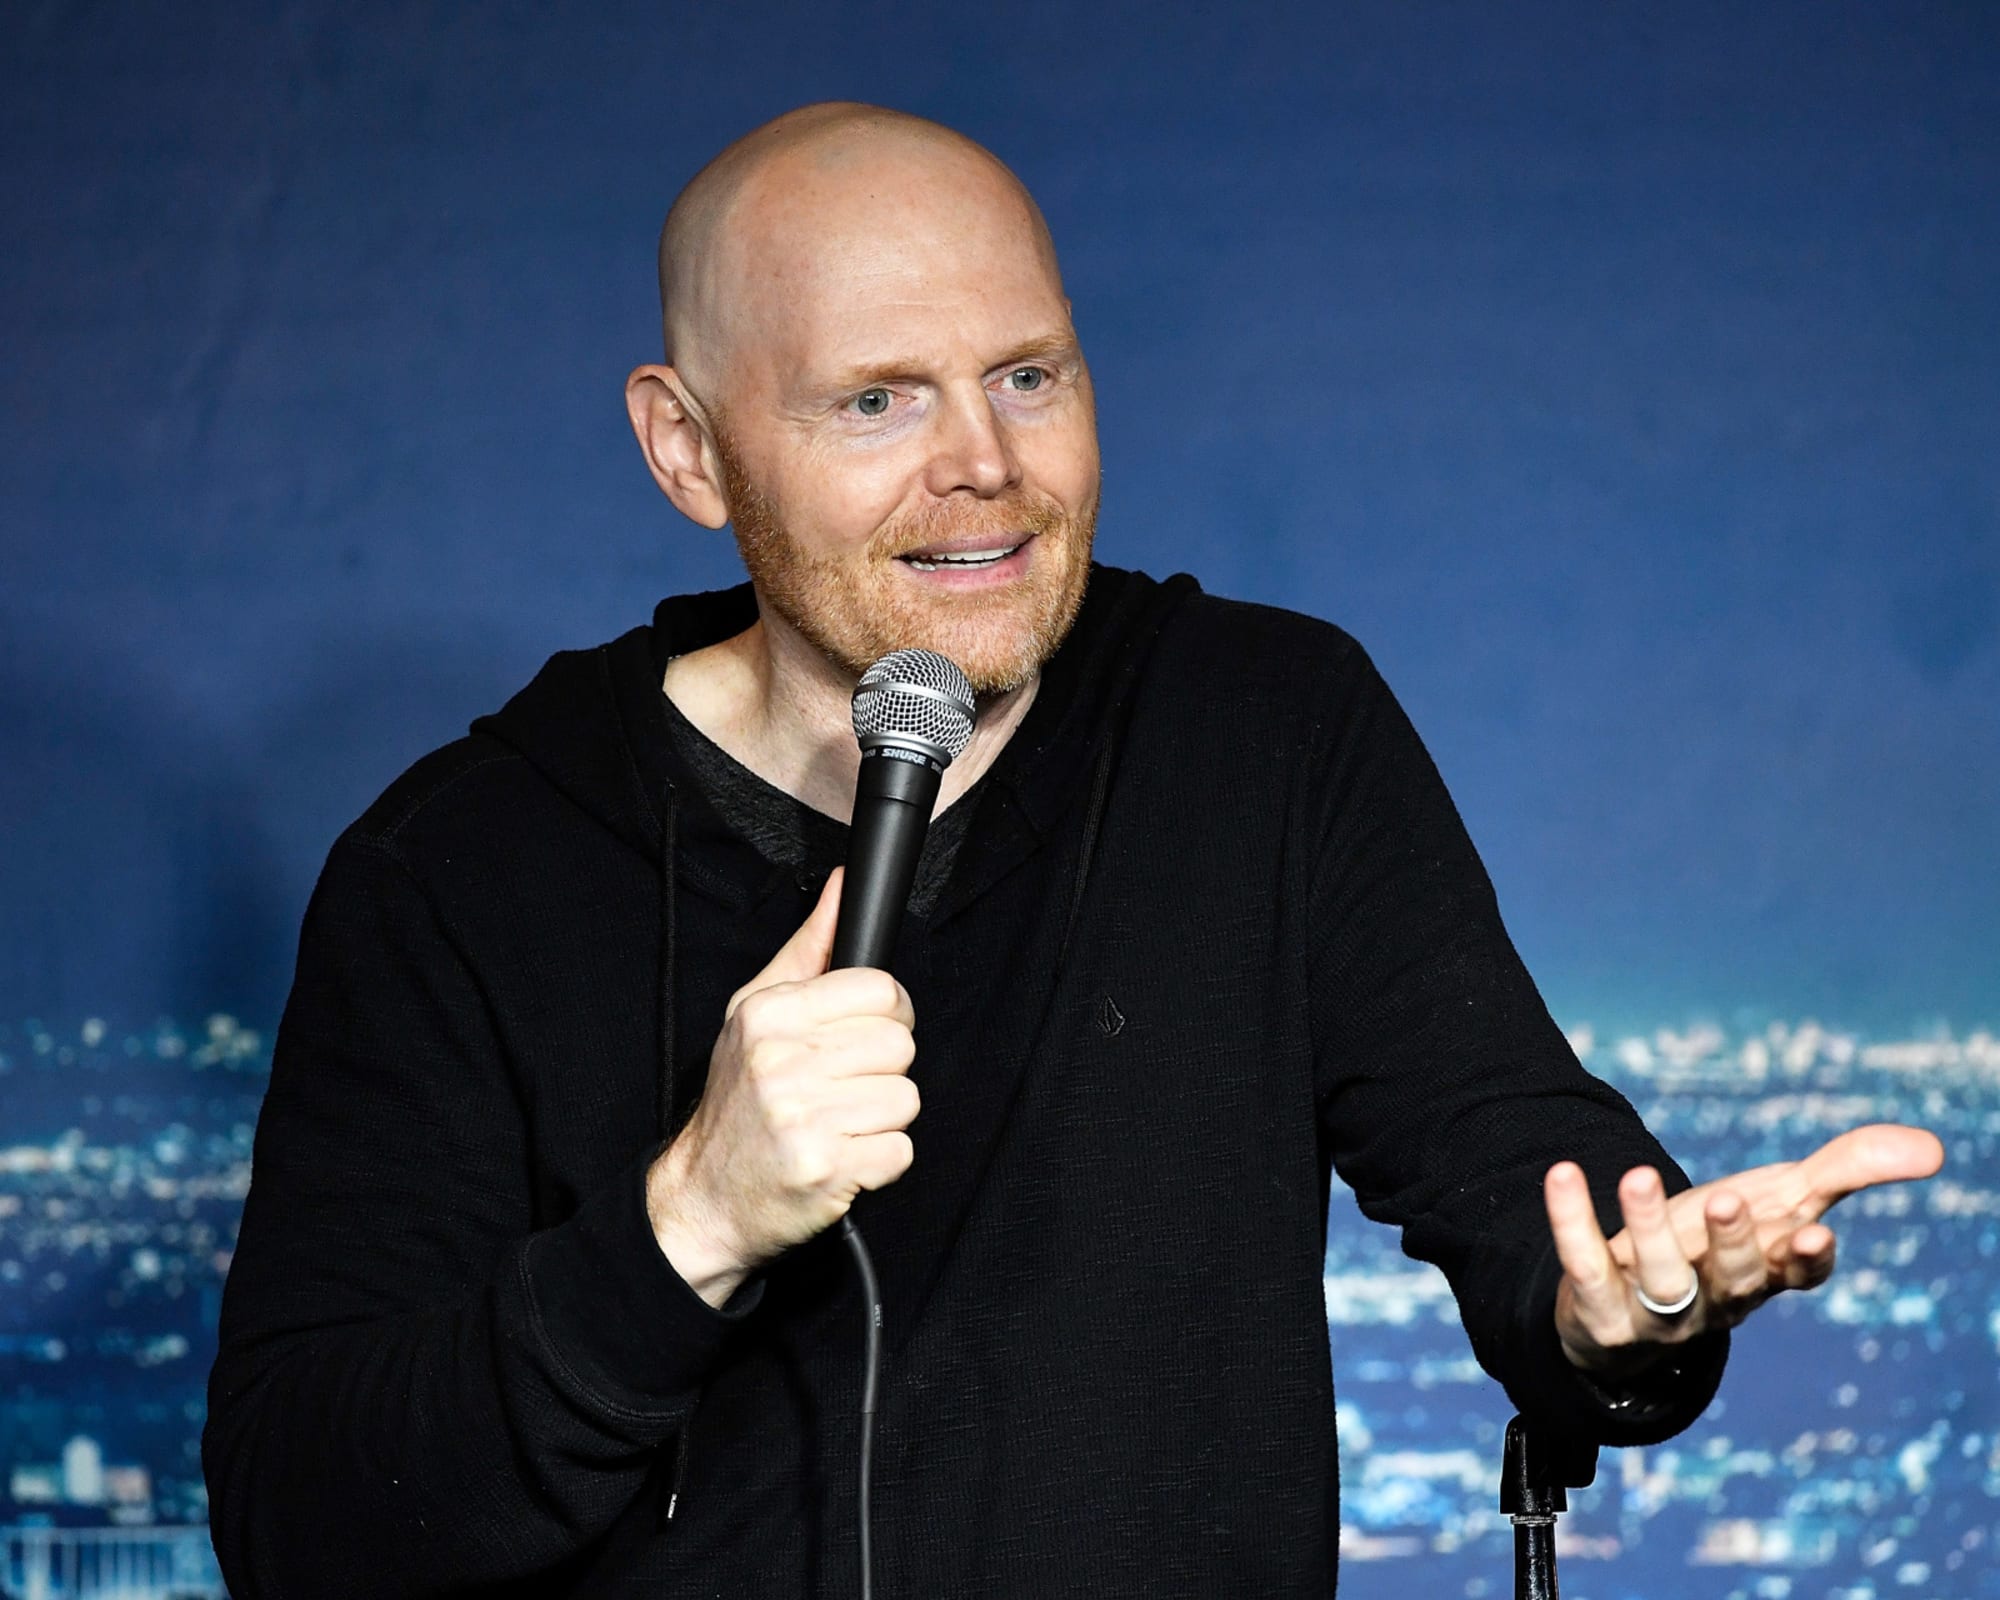 Saturday Night Live with host Bill Burr What to watch for